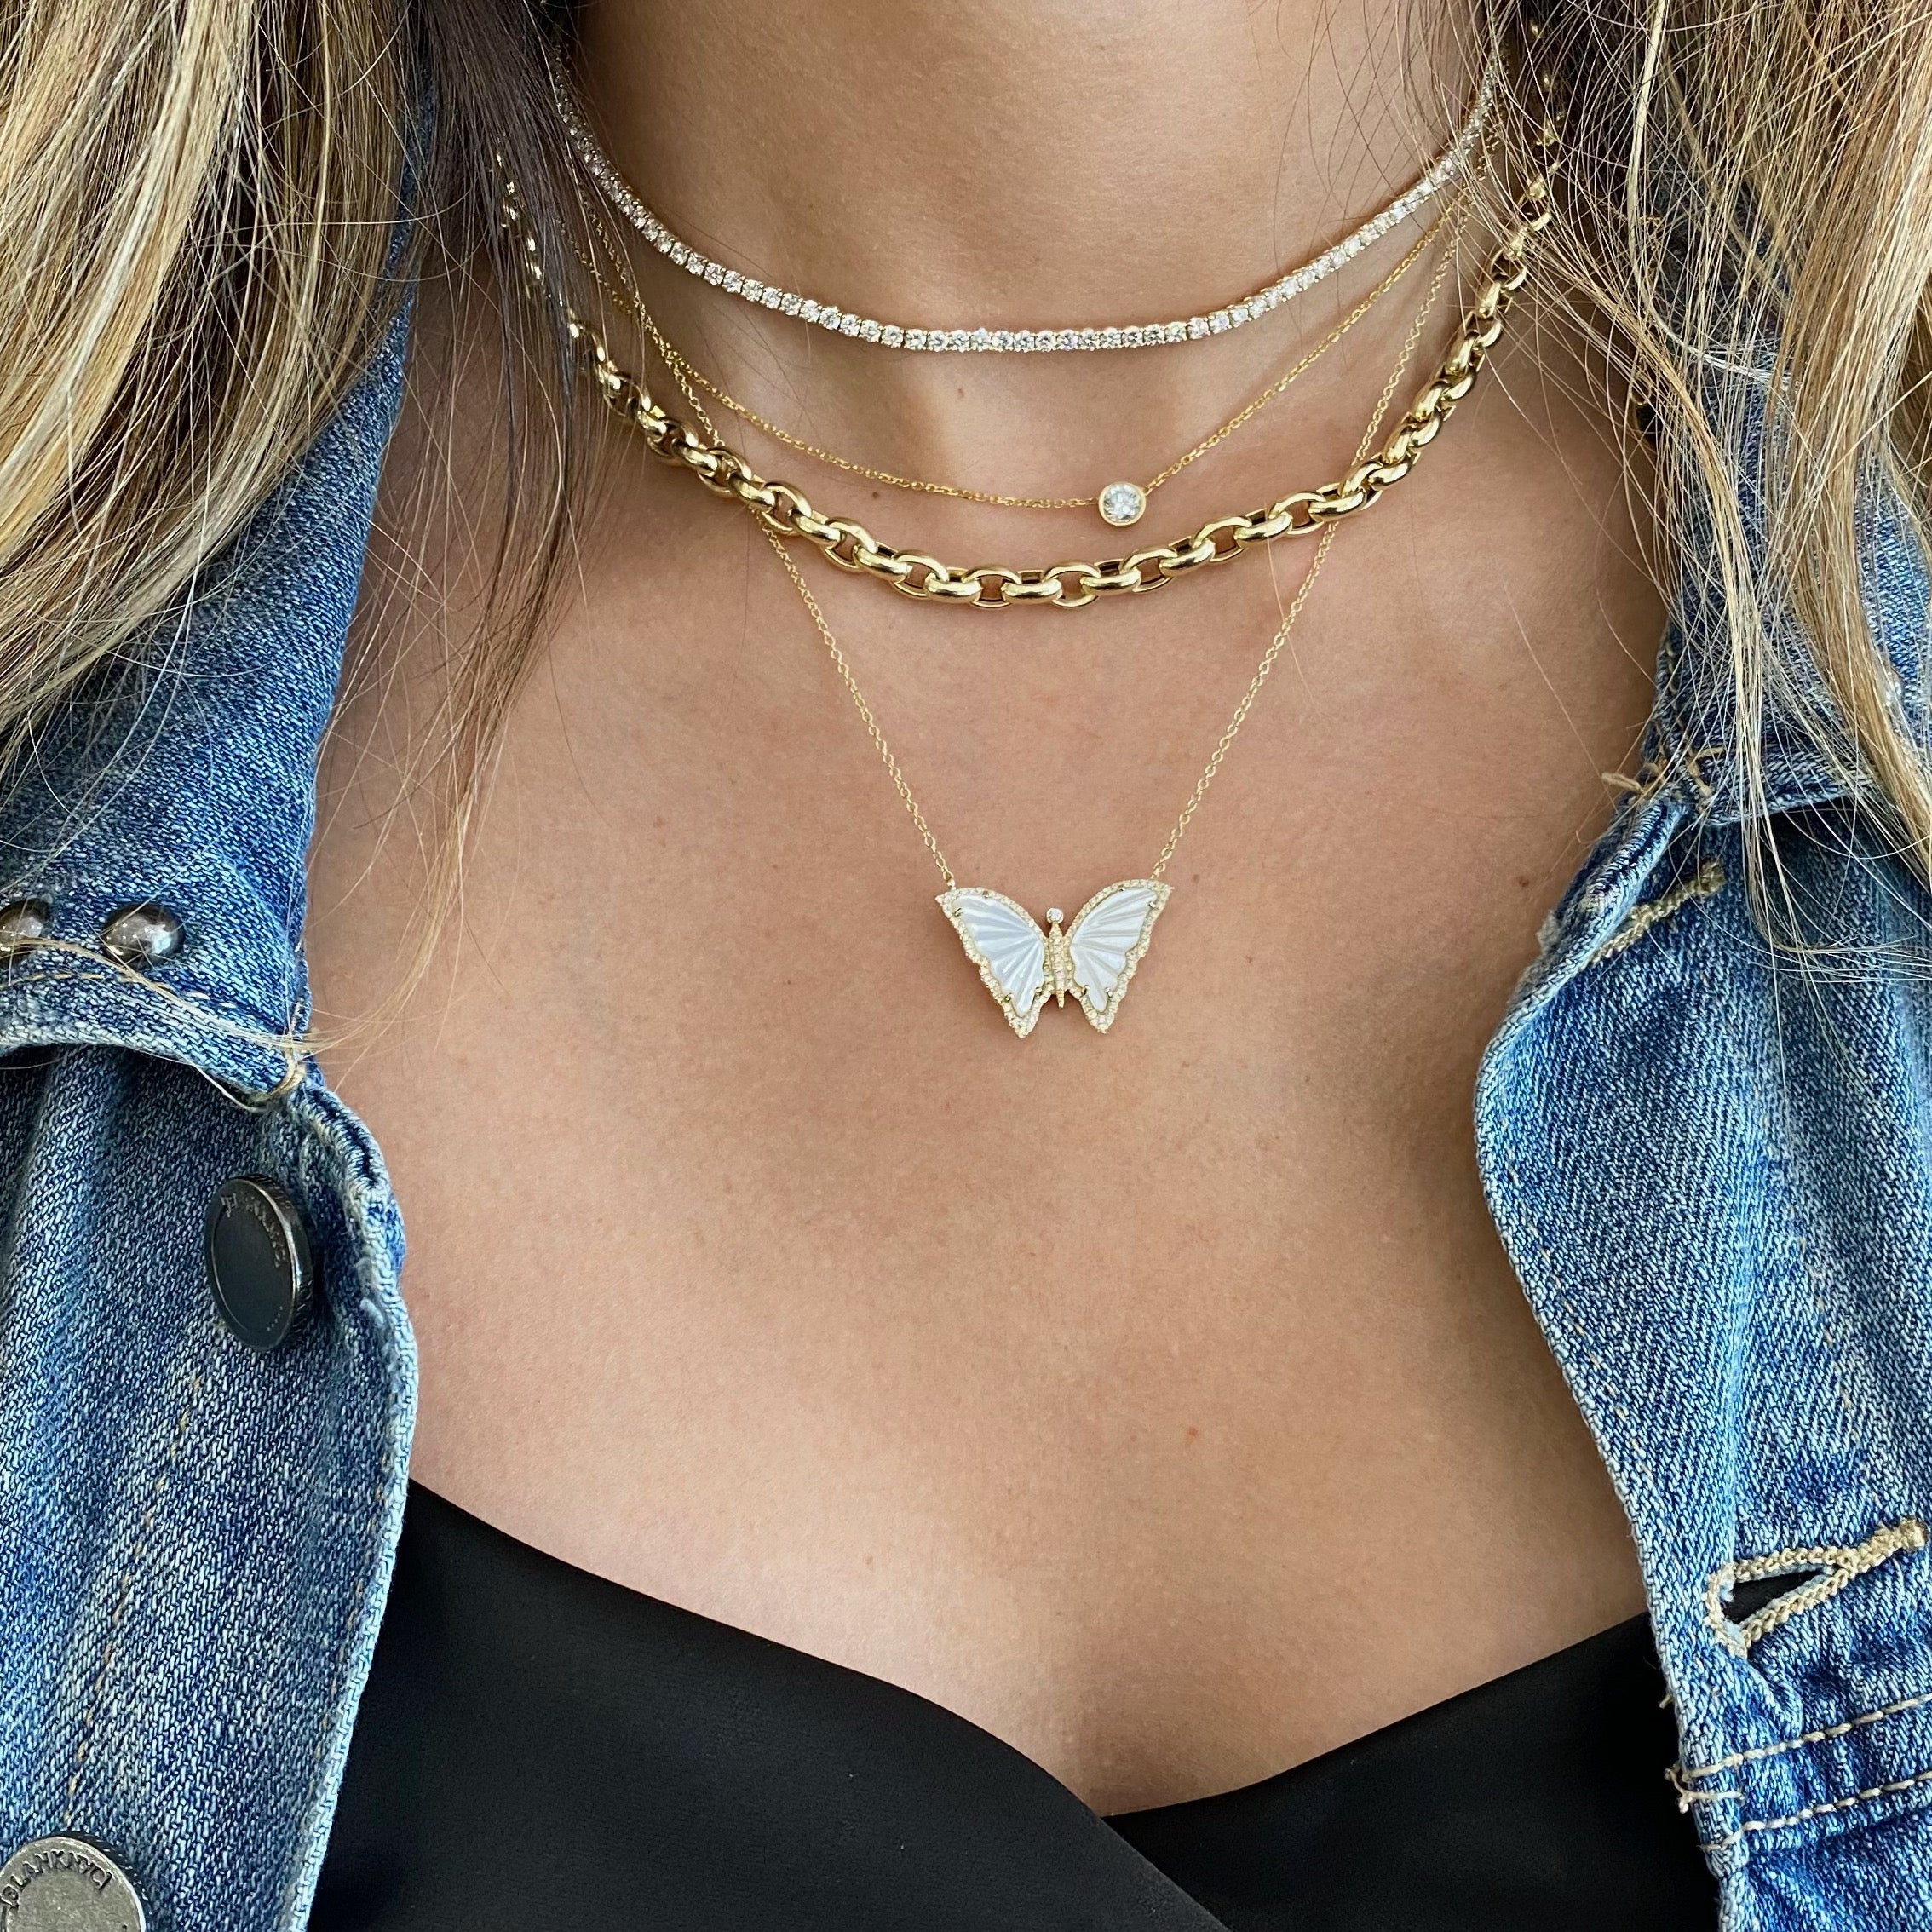 Cute Rose Gold Doublue Butterfly Pendant Animal Necklace, Fashion Necklaces